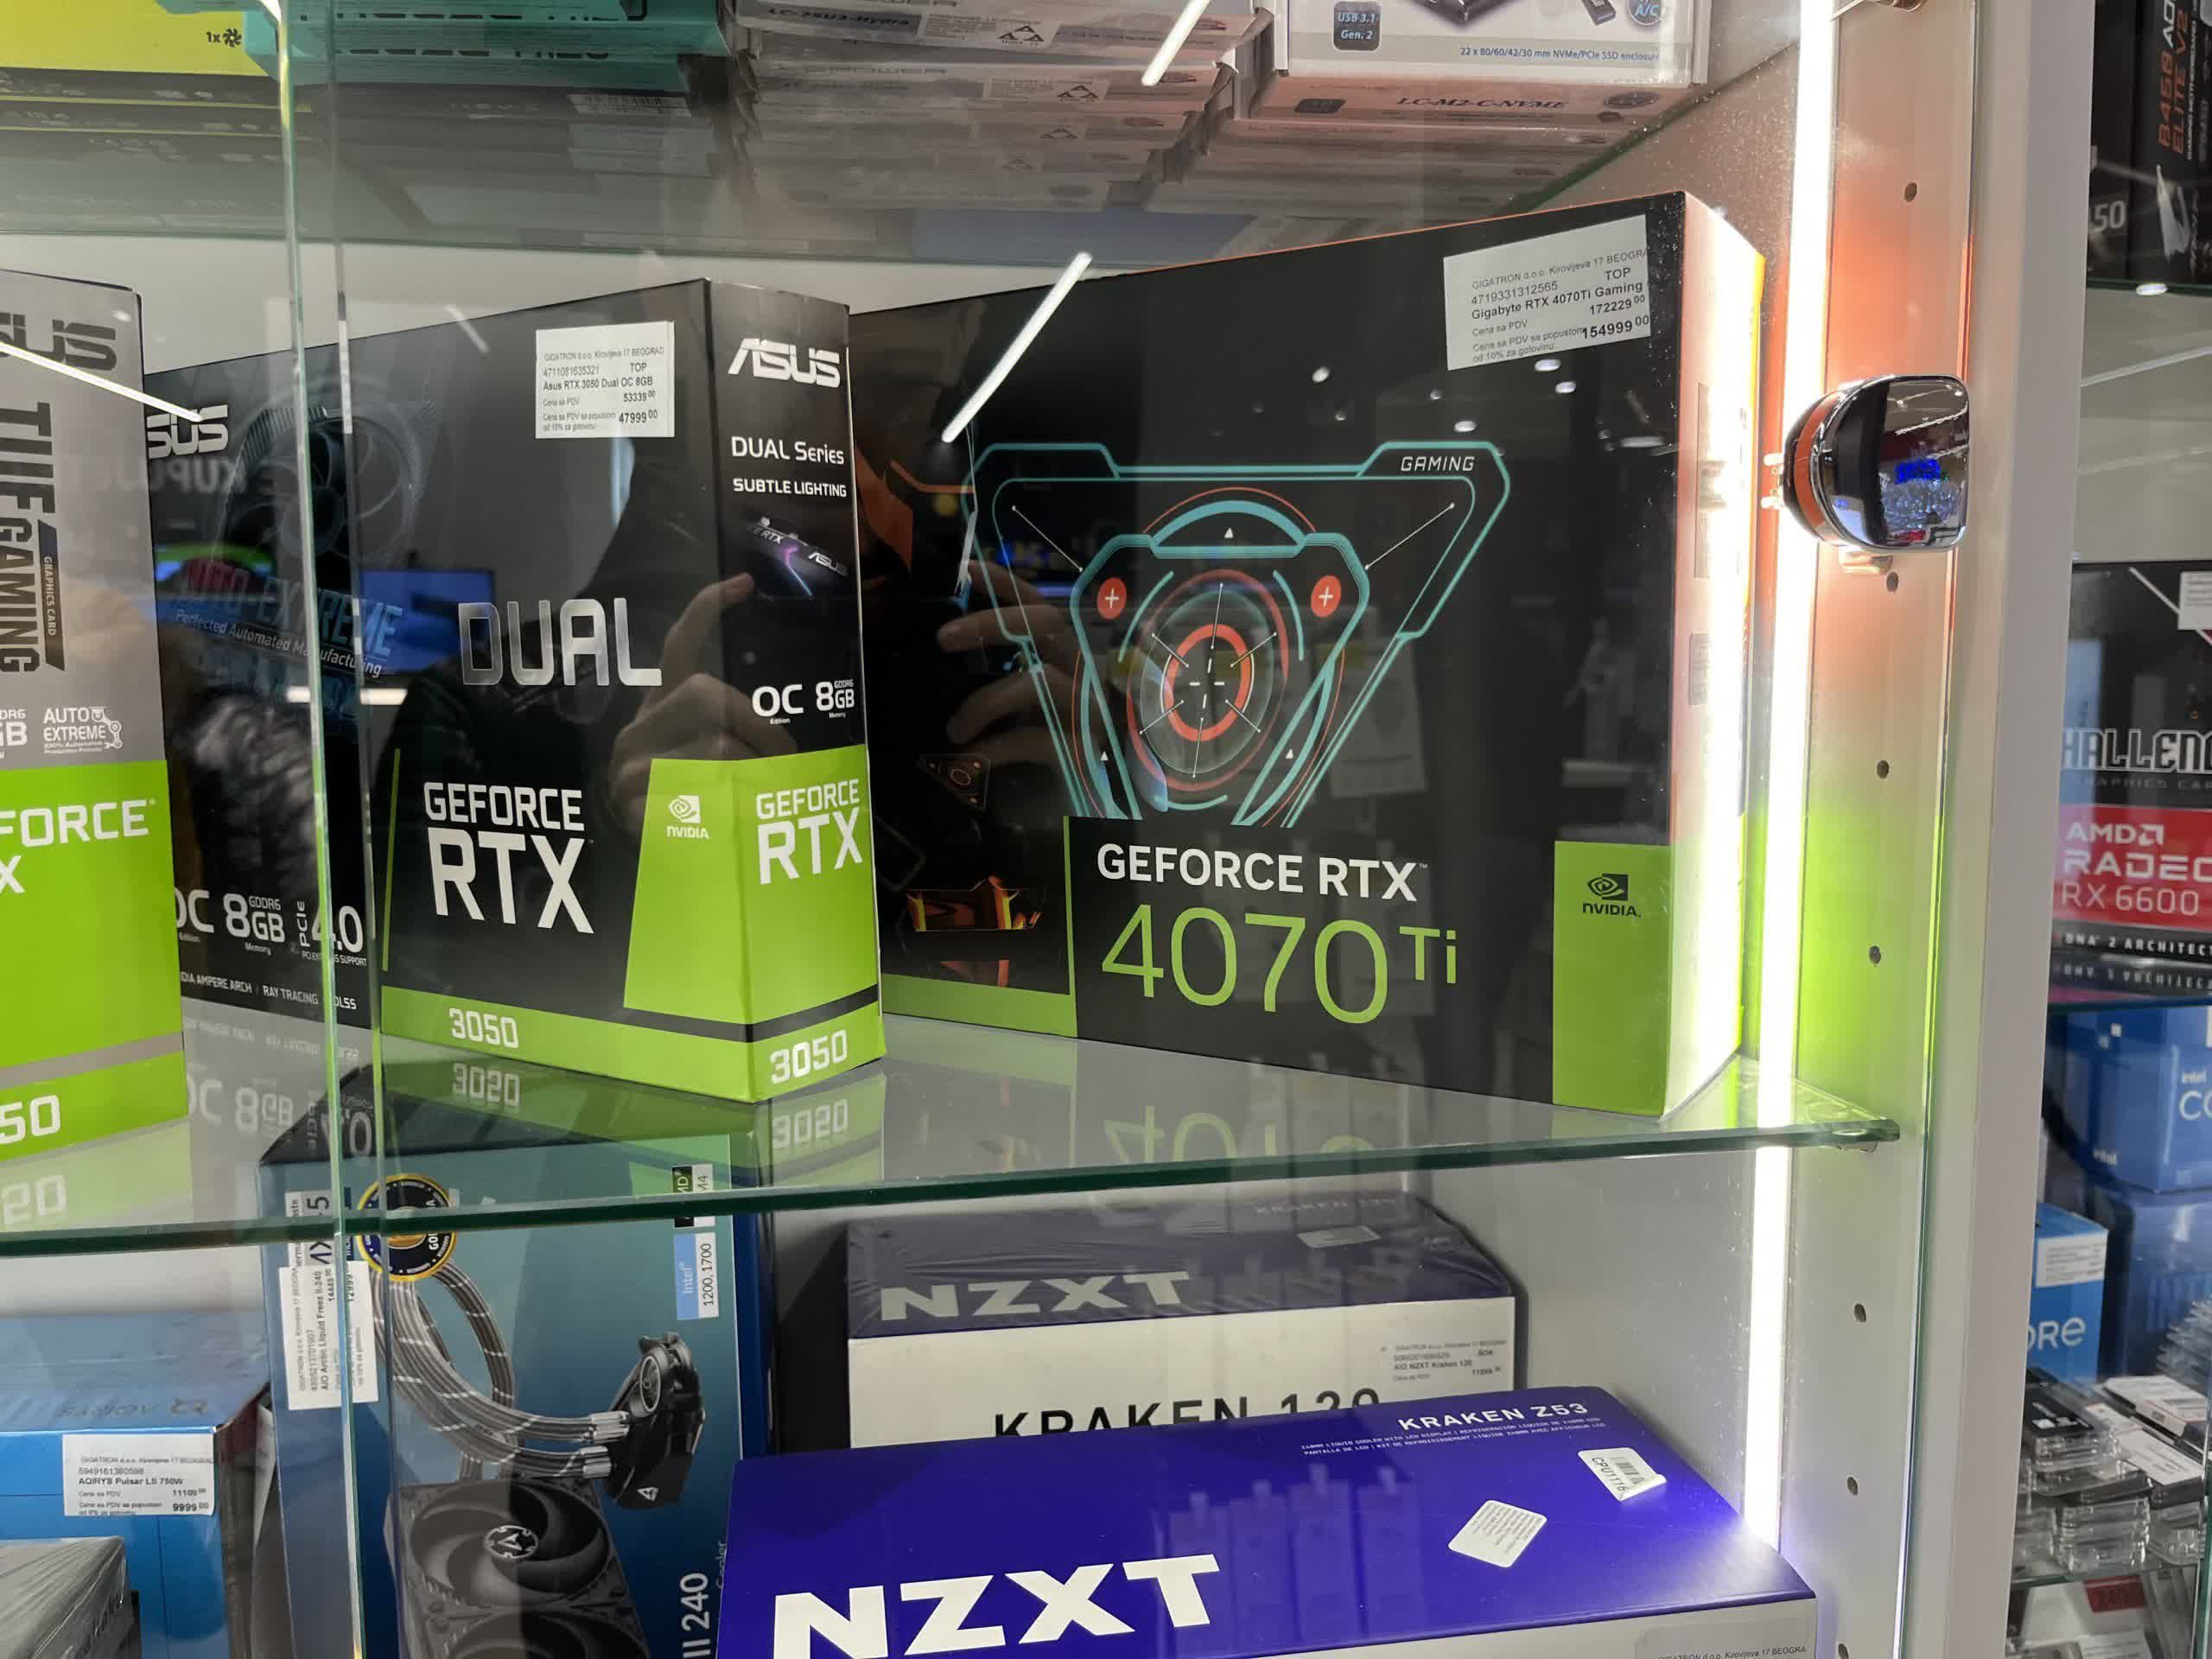 The Nvidia RTX 4070 Ti is now available in Serbia for $1,400